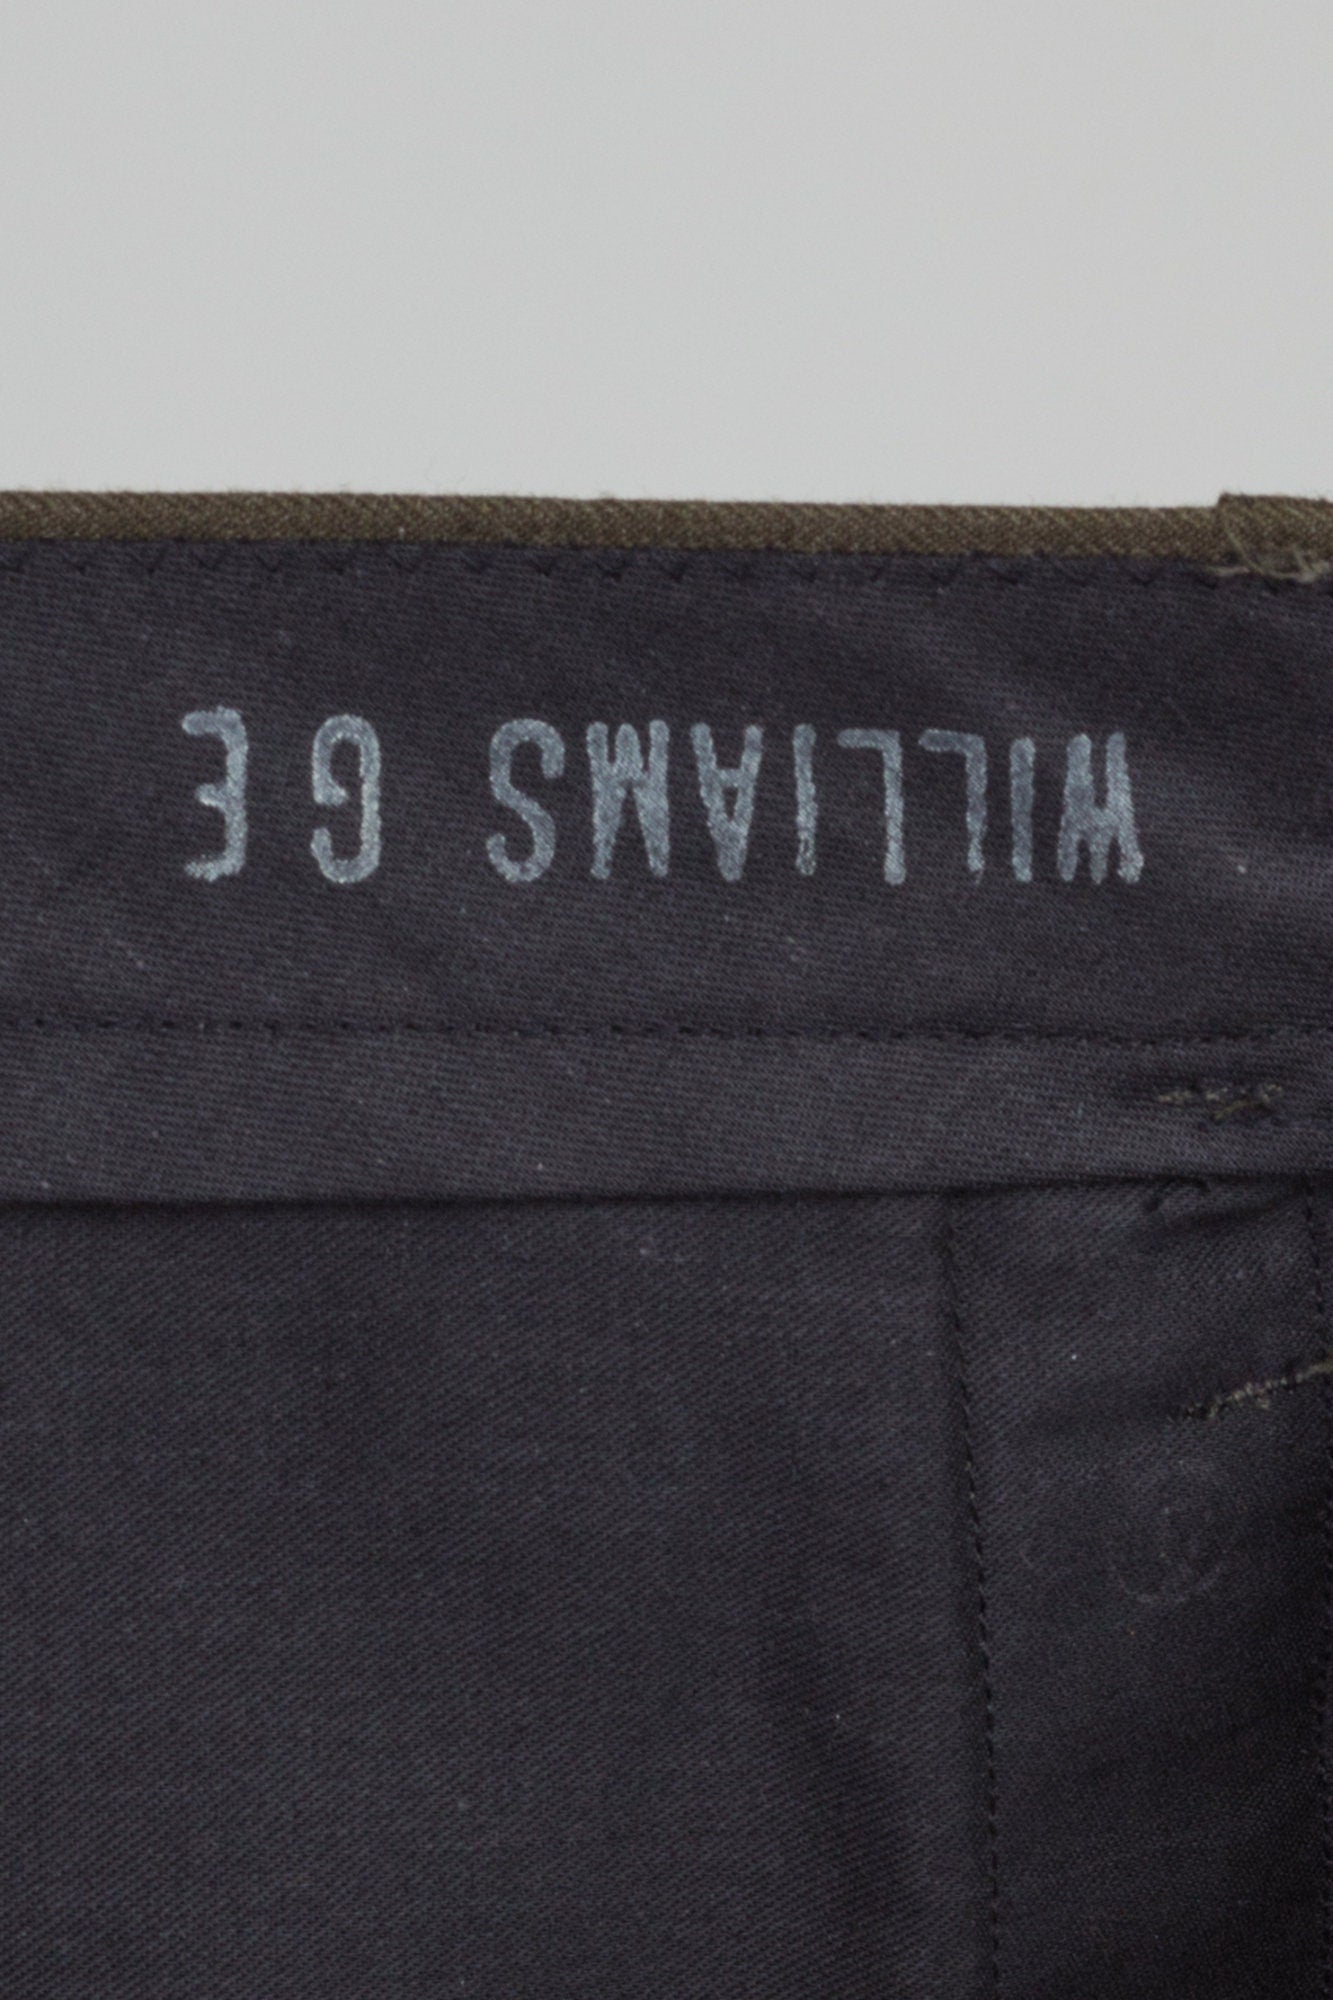 Vintage Olive Wool Men's Army Trousers - 31" Waist 